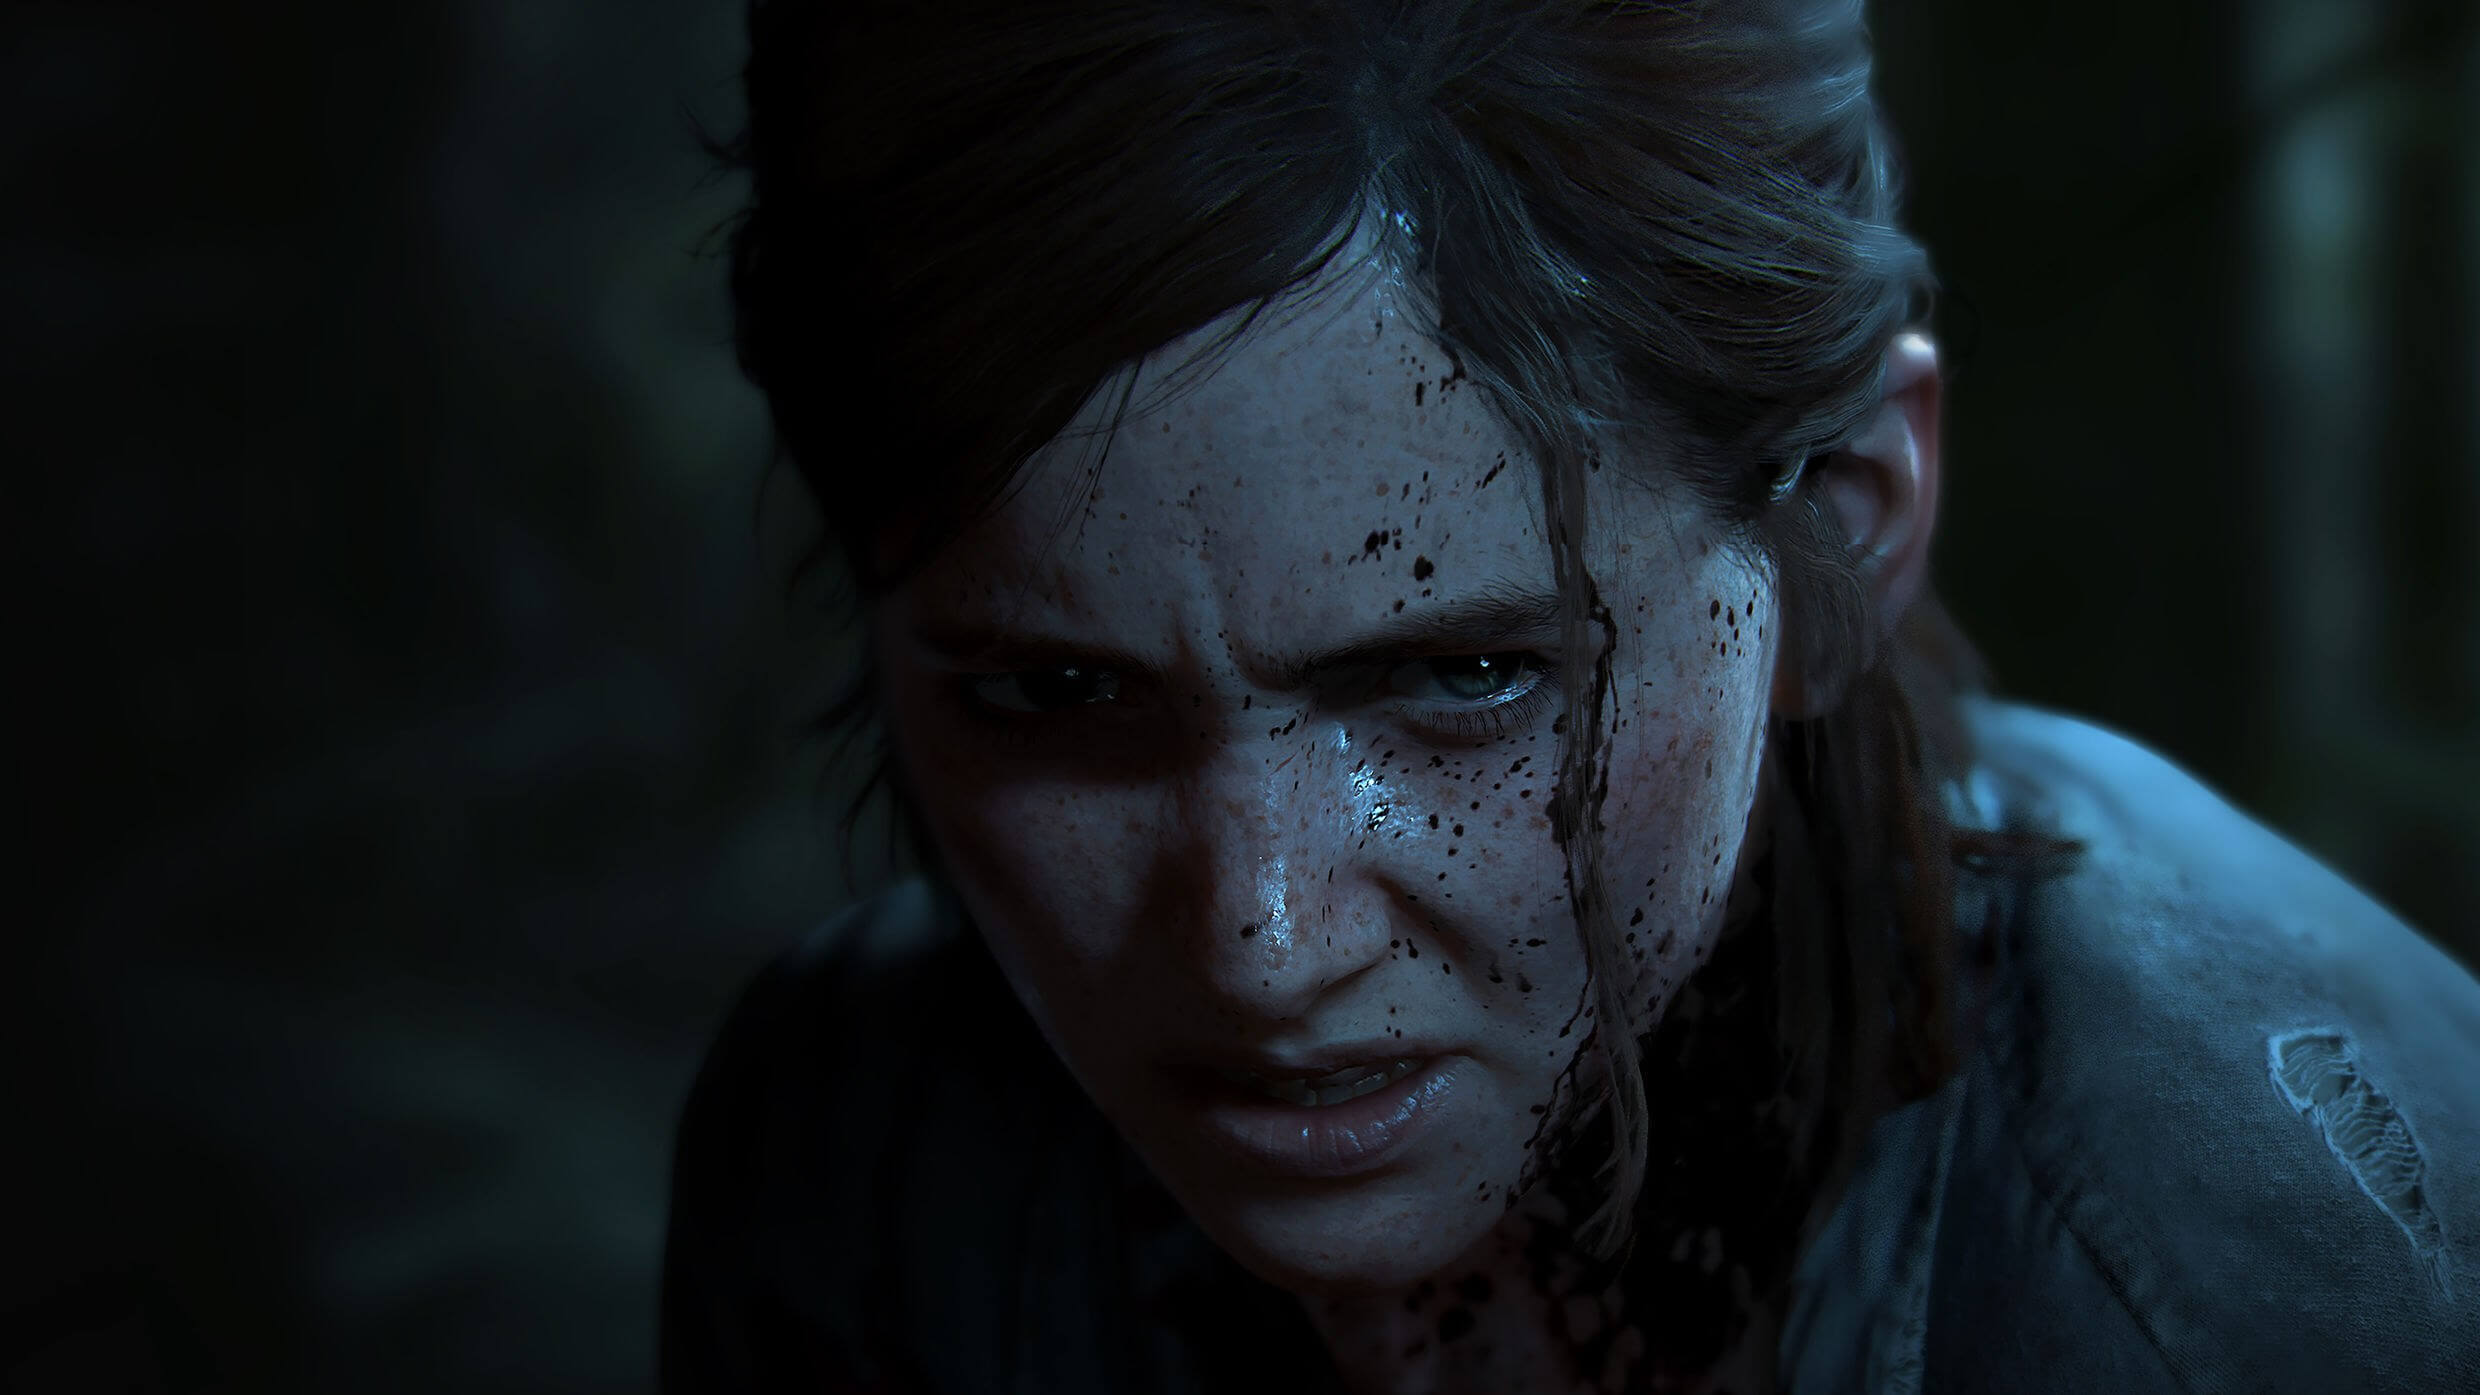 Patch vulnerability reportedly led to The Last of Us Part II leak